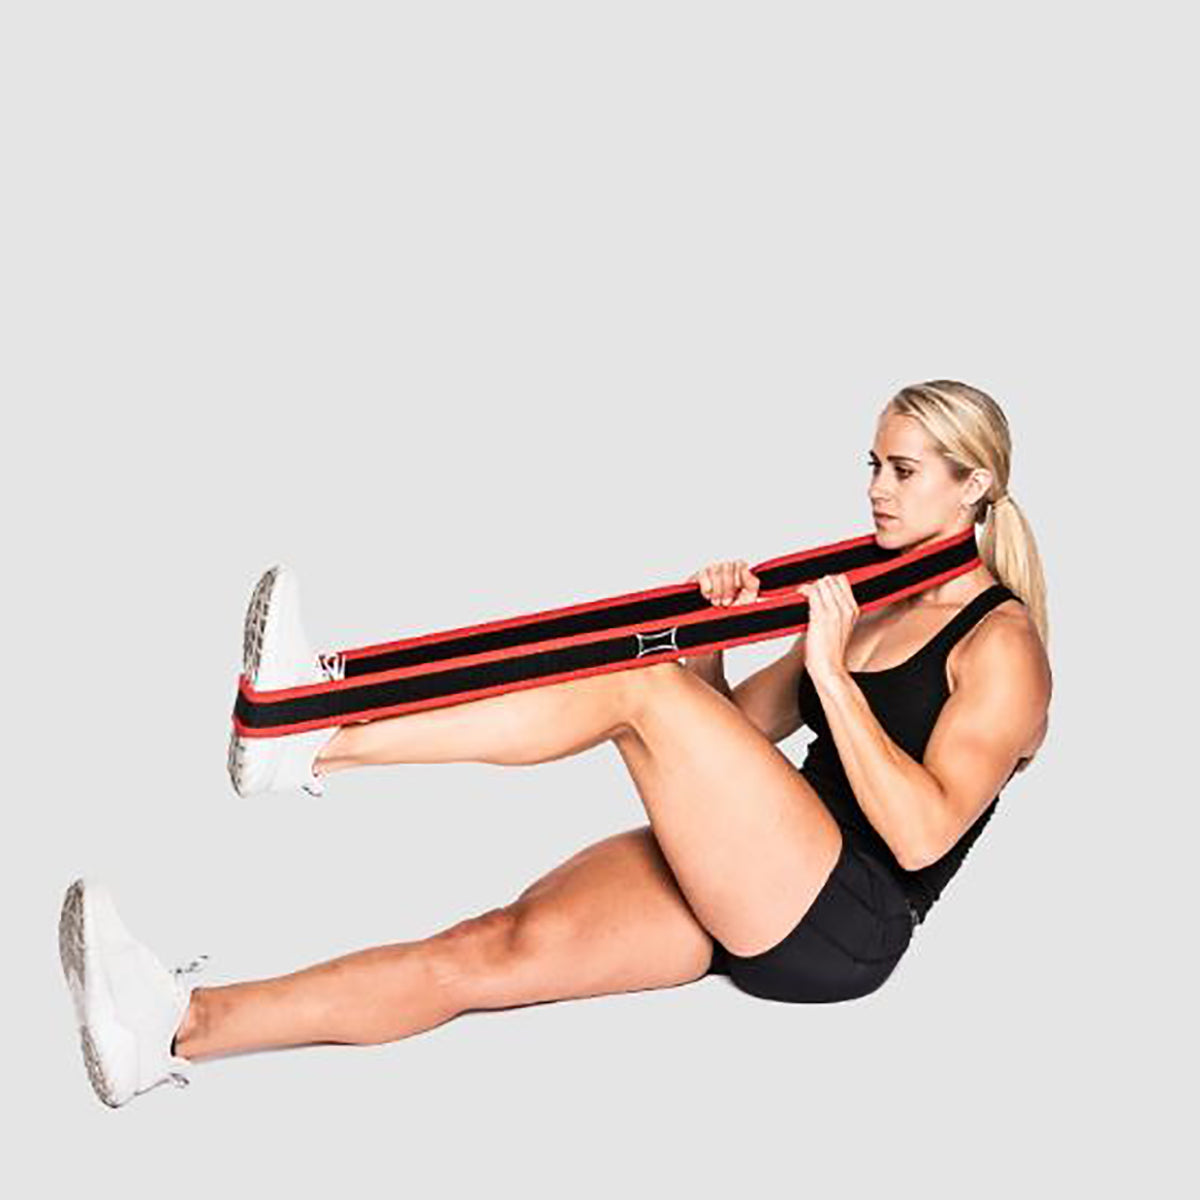 Sling Shot Mammoth Resistance Band by Mark Bell - 72" - Red Sling Shot